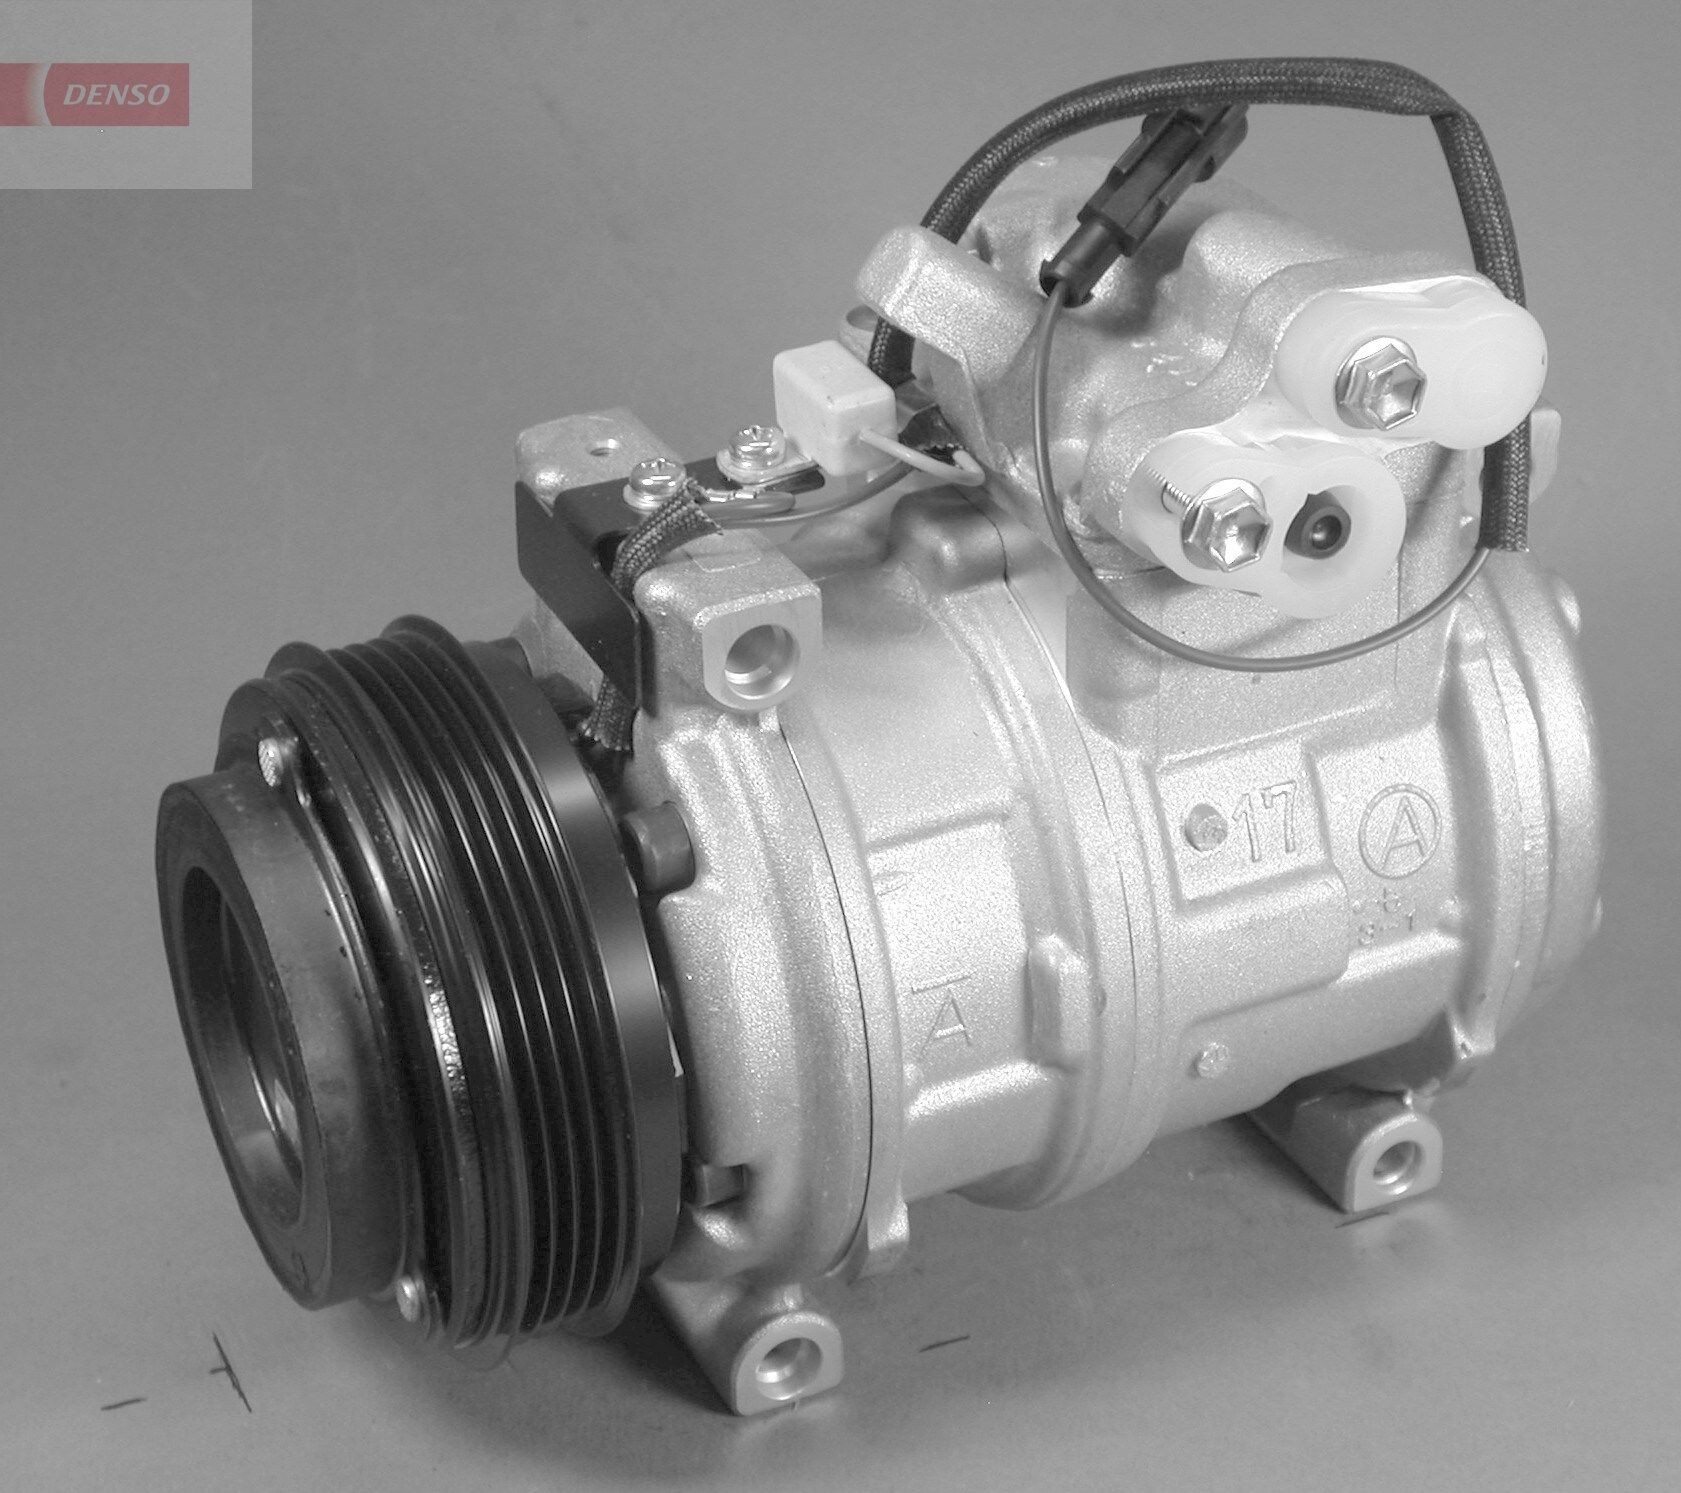 DENSO DCP12003 Air conditioning compressor 10PA17C, 12V, PAG 46, R 134a, with magnetic clutch